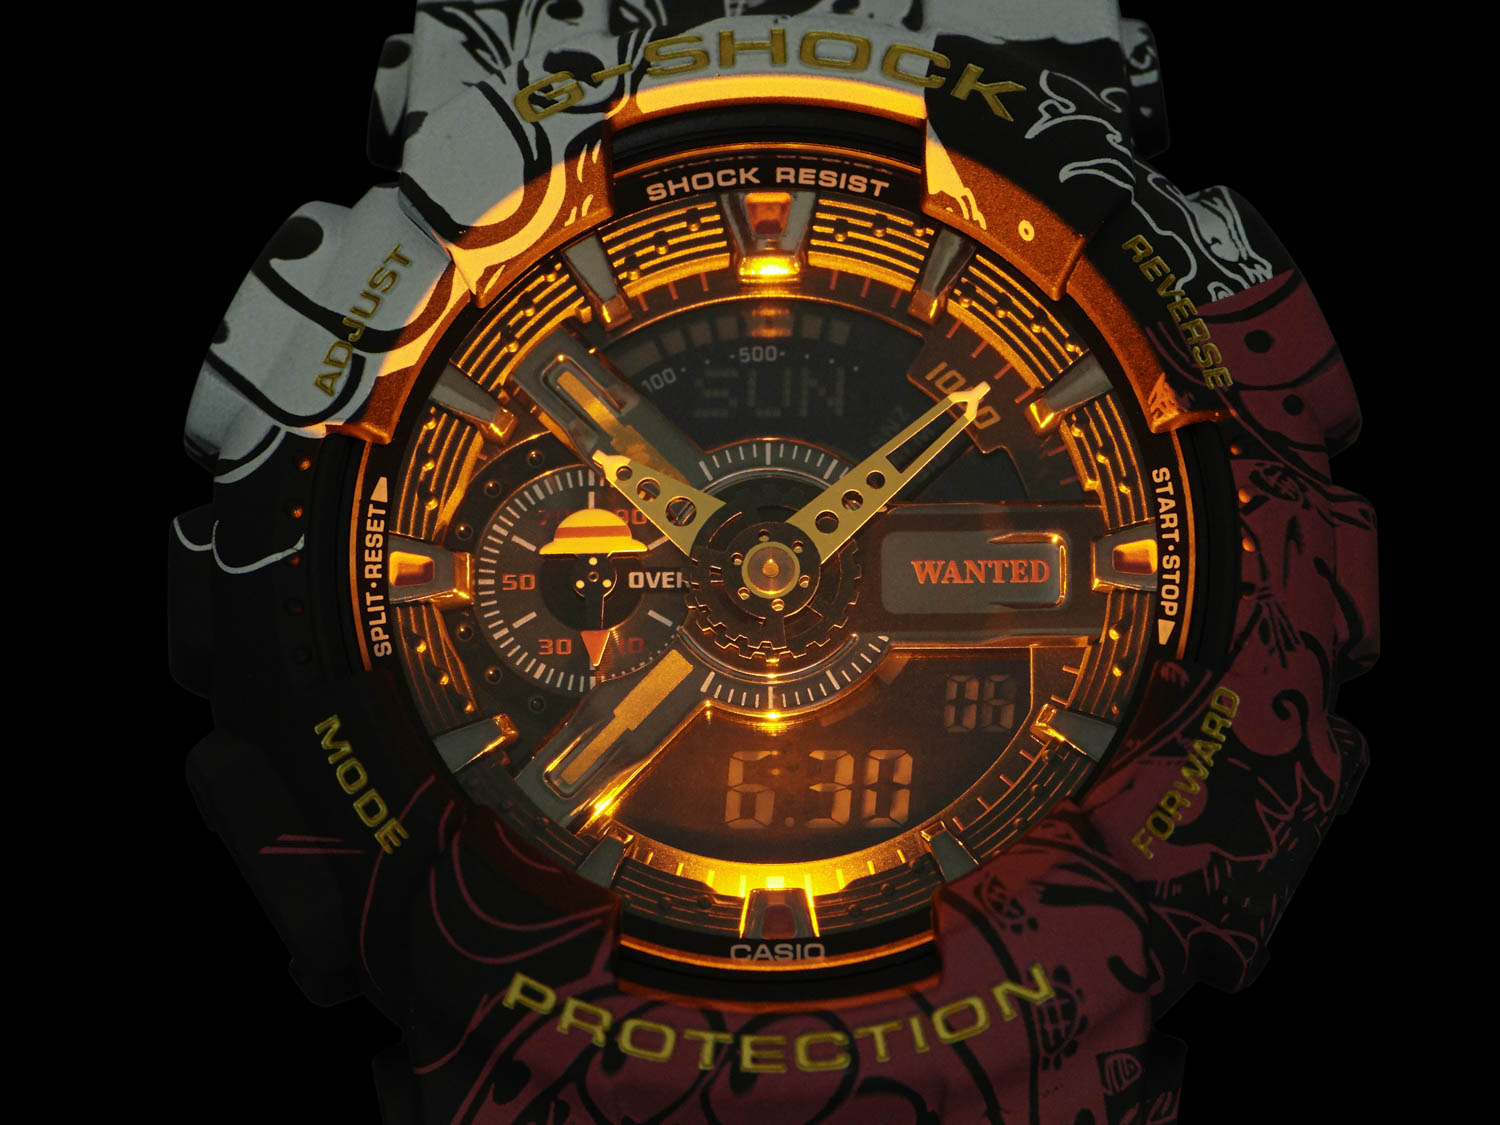 Resident Evil Death Island Seiko Watches Cost Over $2,300 - Siliconera